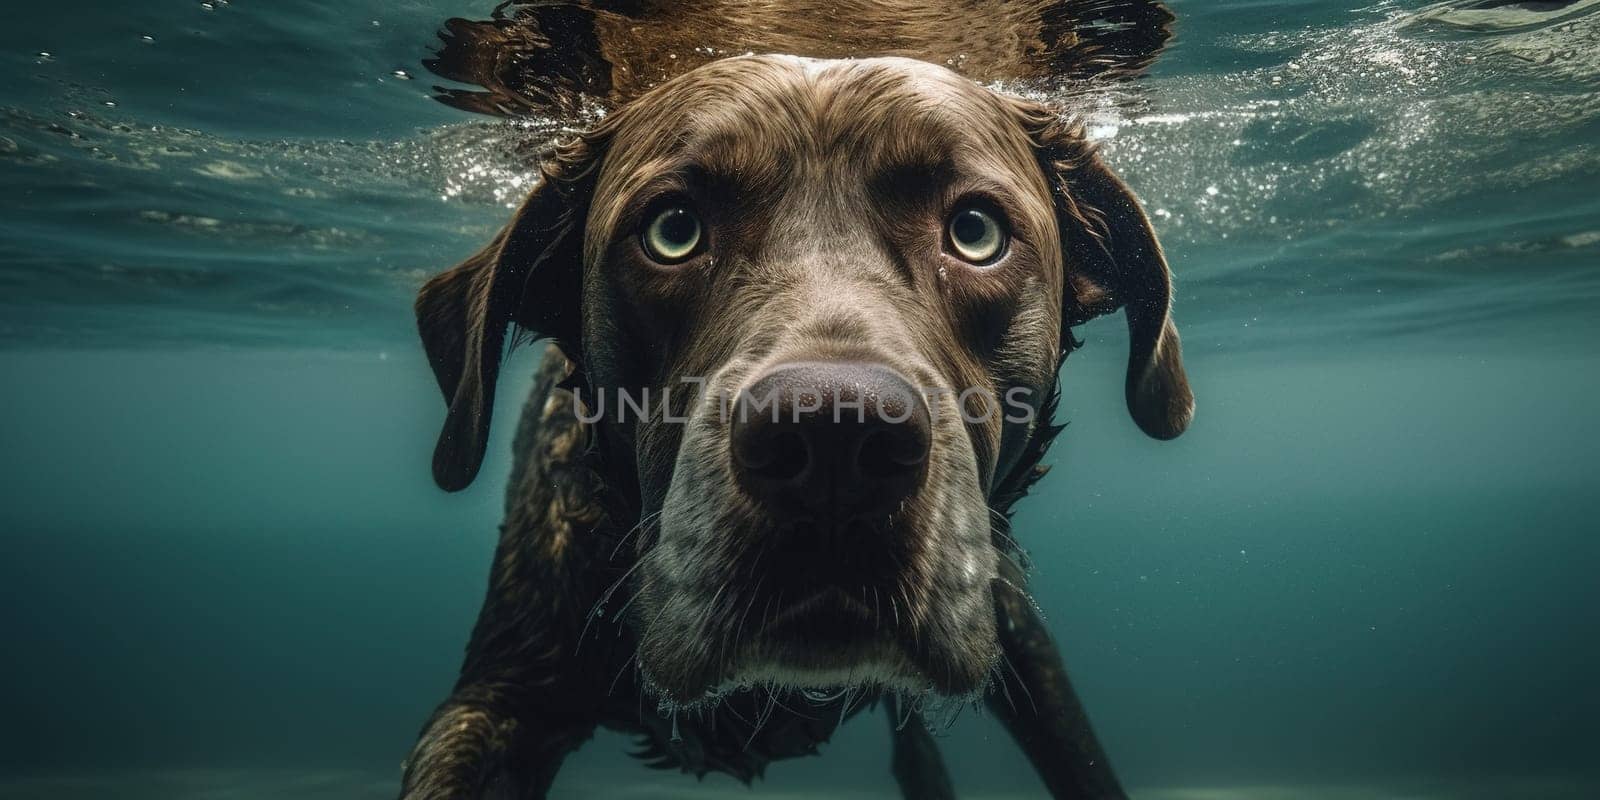 Underwater, closeup on dog muzzle shows joy of swimming in water.